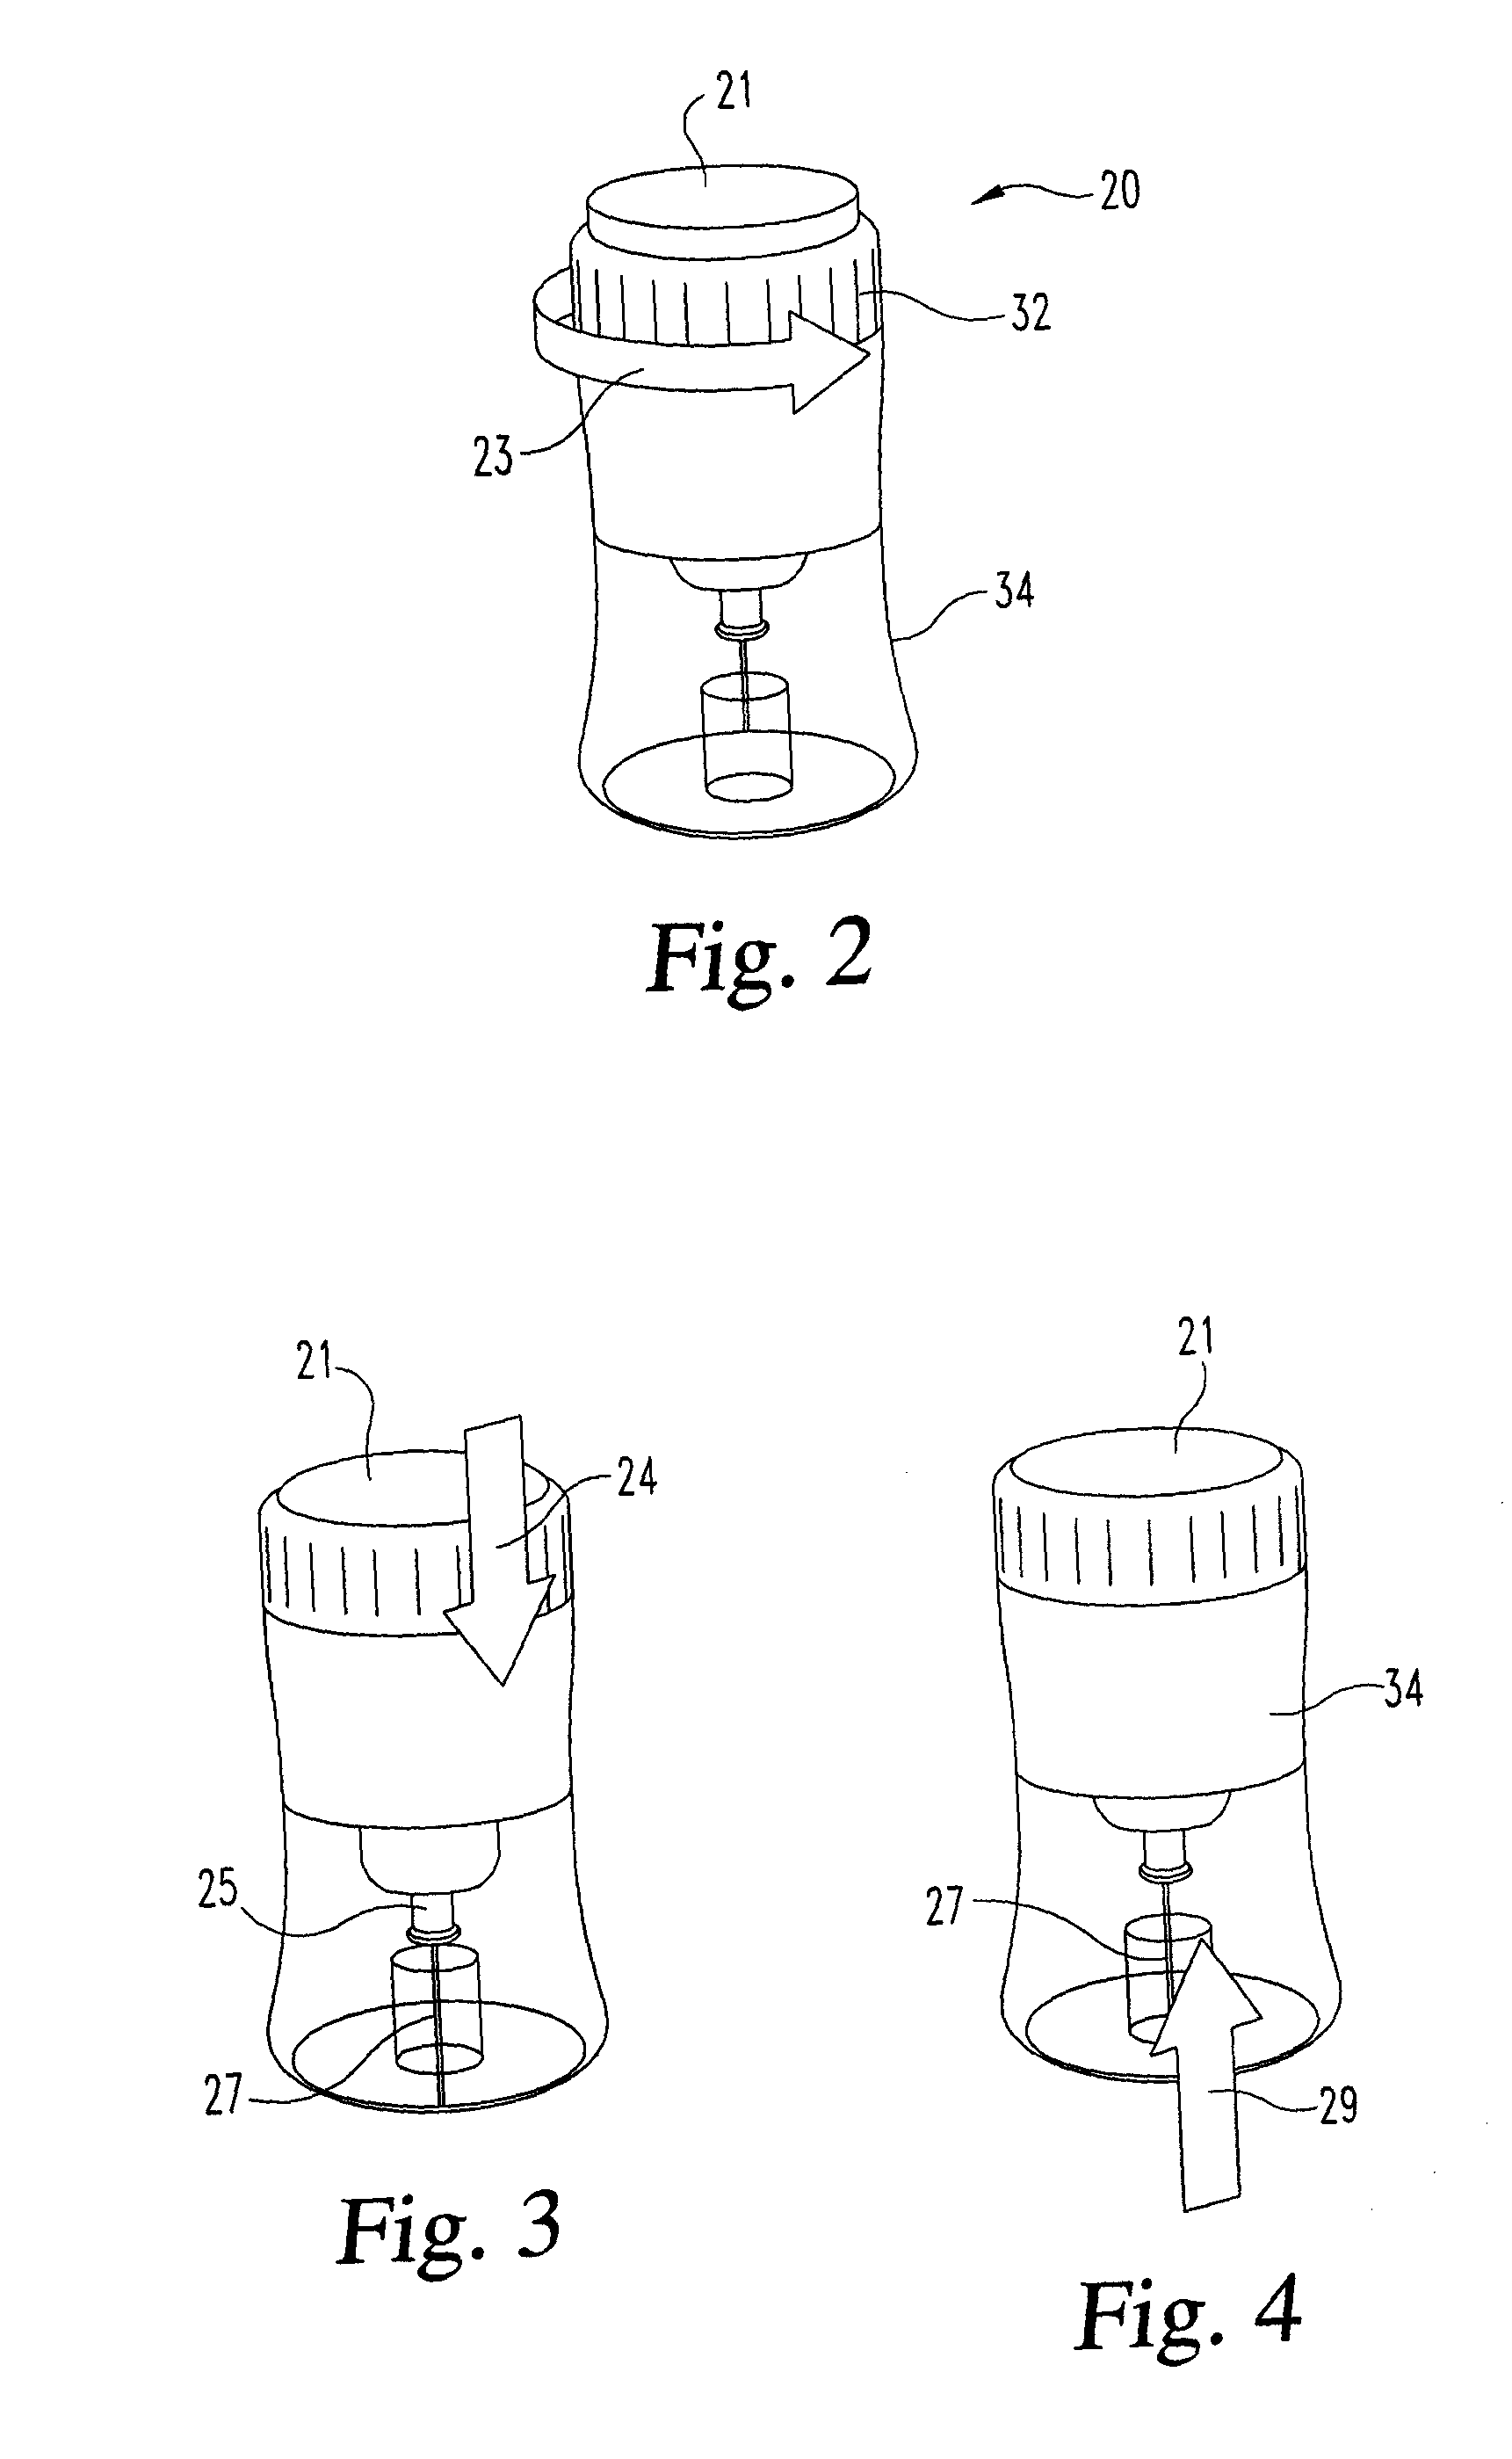 Delay mechanism suitable for compact automatic injection device